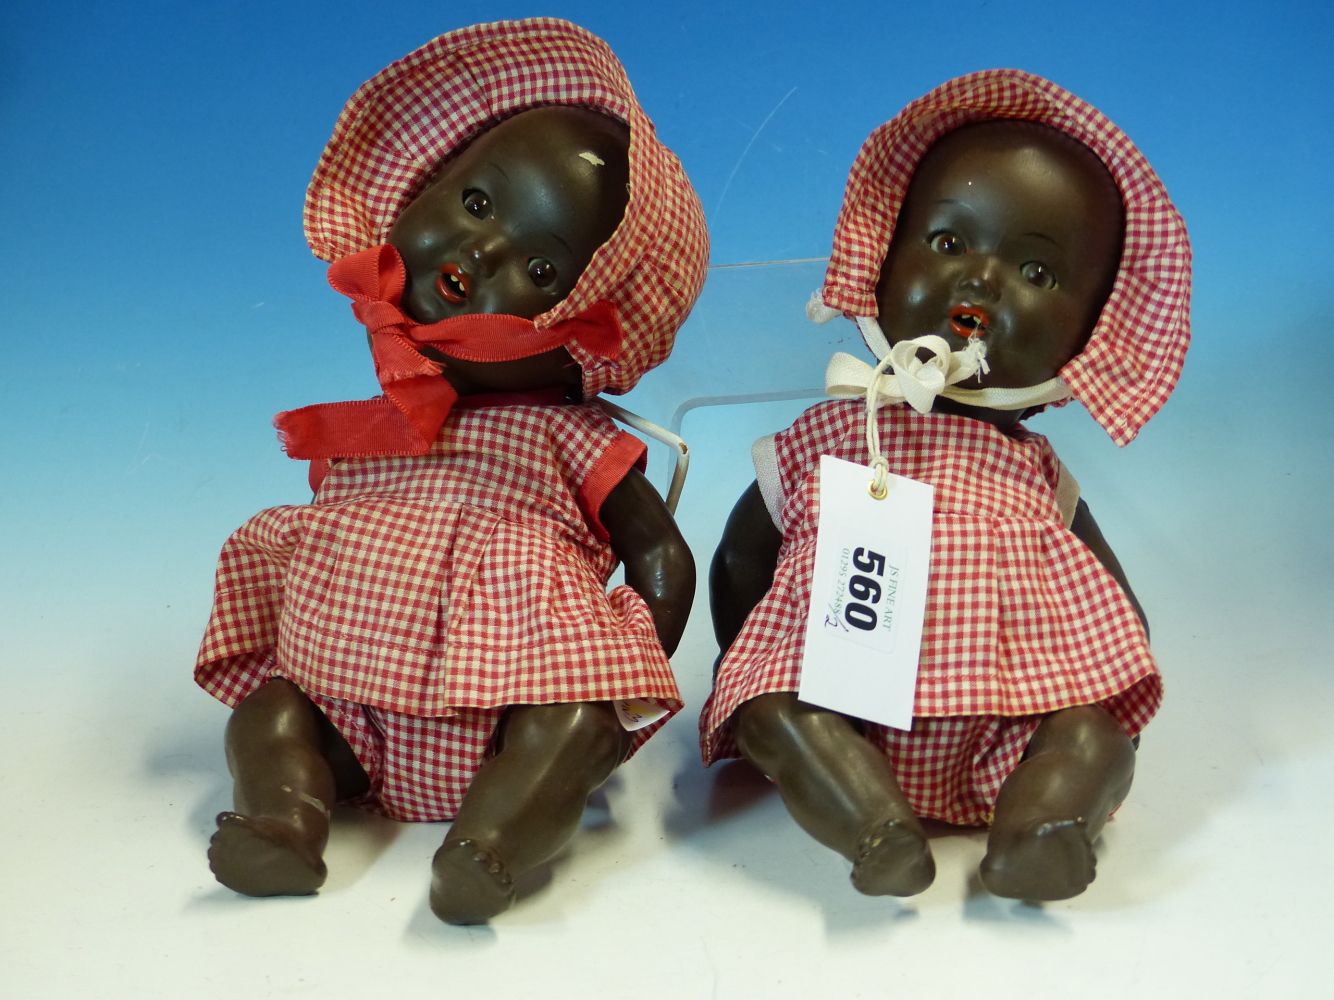 TWO SIMILAR ARMAND MARSEILLE BLACK DOLLS IN RED GINGHAM DRESSES AND BONNETS. H 27cms.